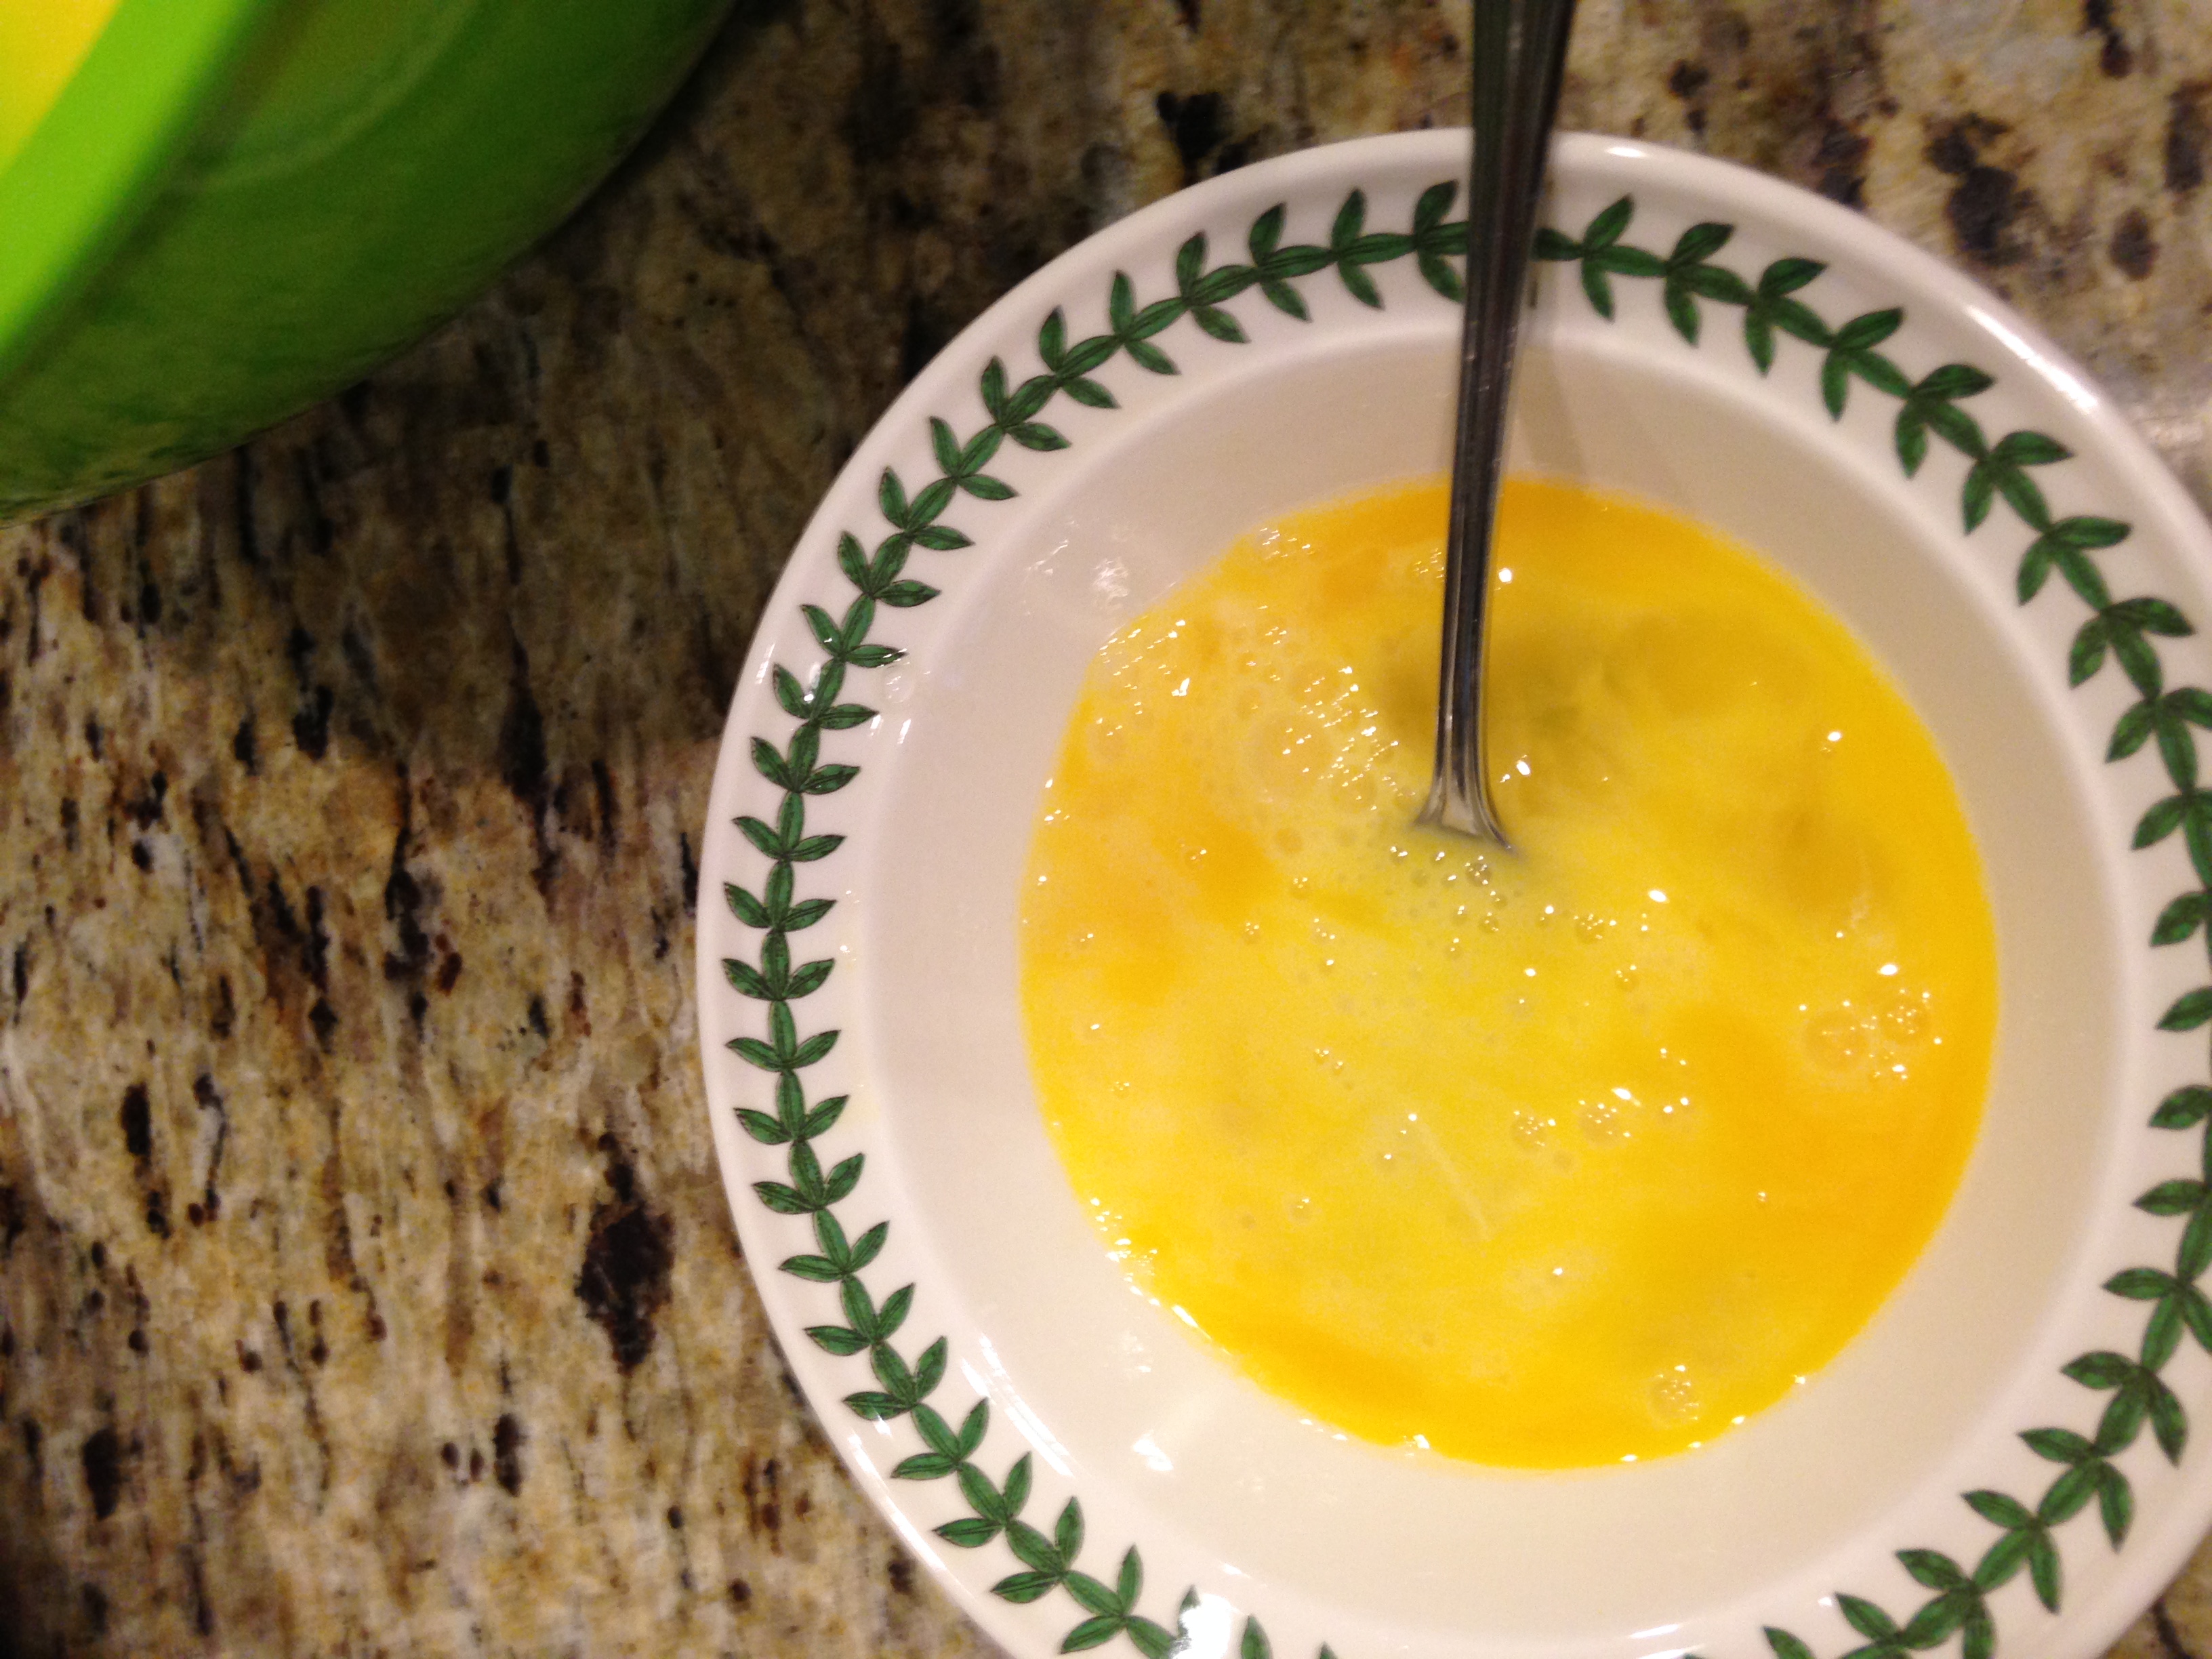 Mix eggs with fork before adding to mixing bow.